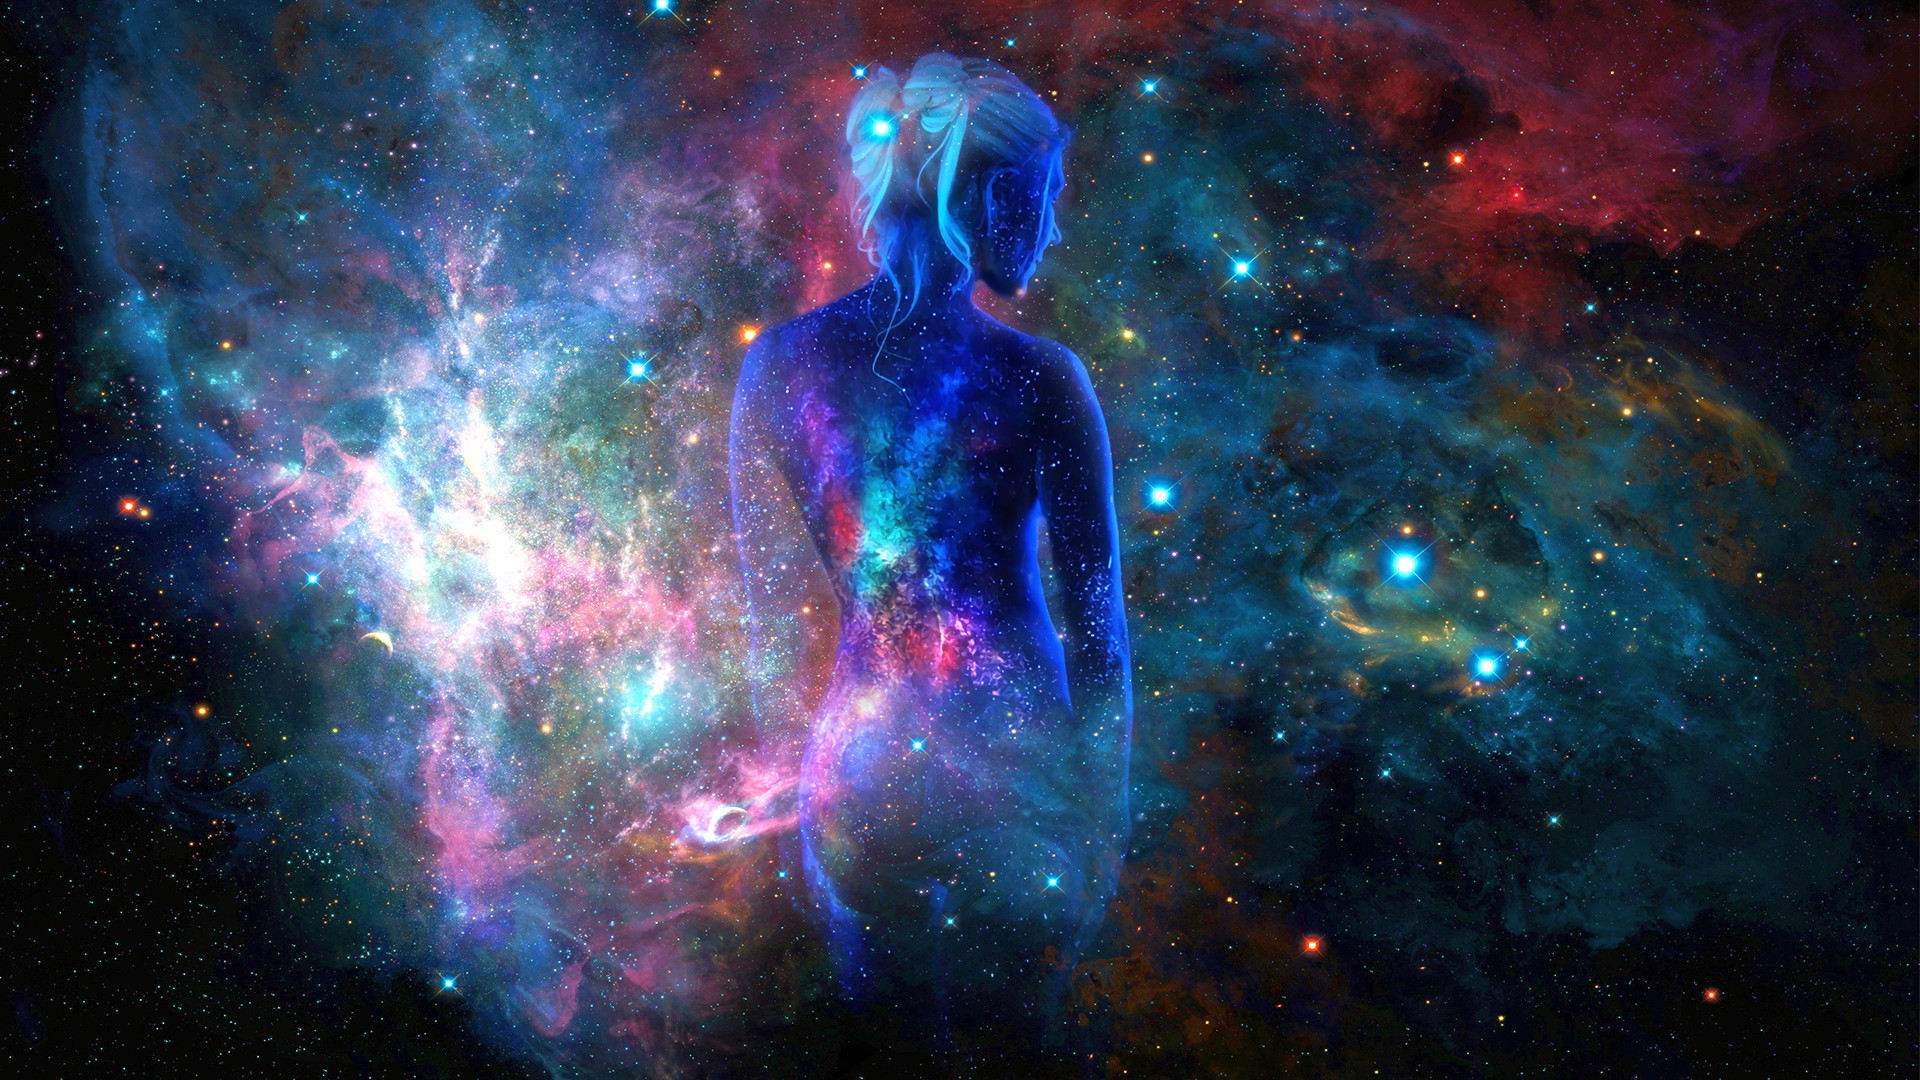 Become One with the Universe